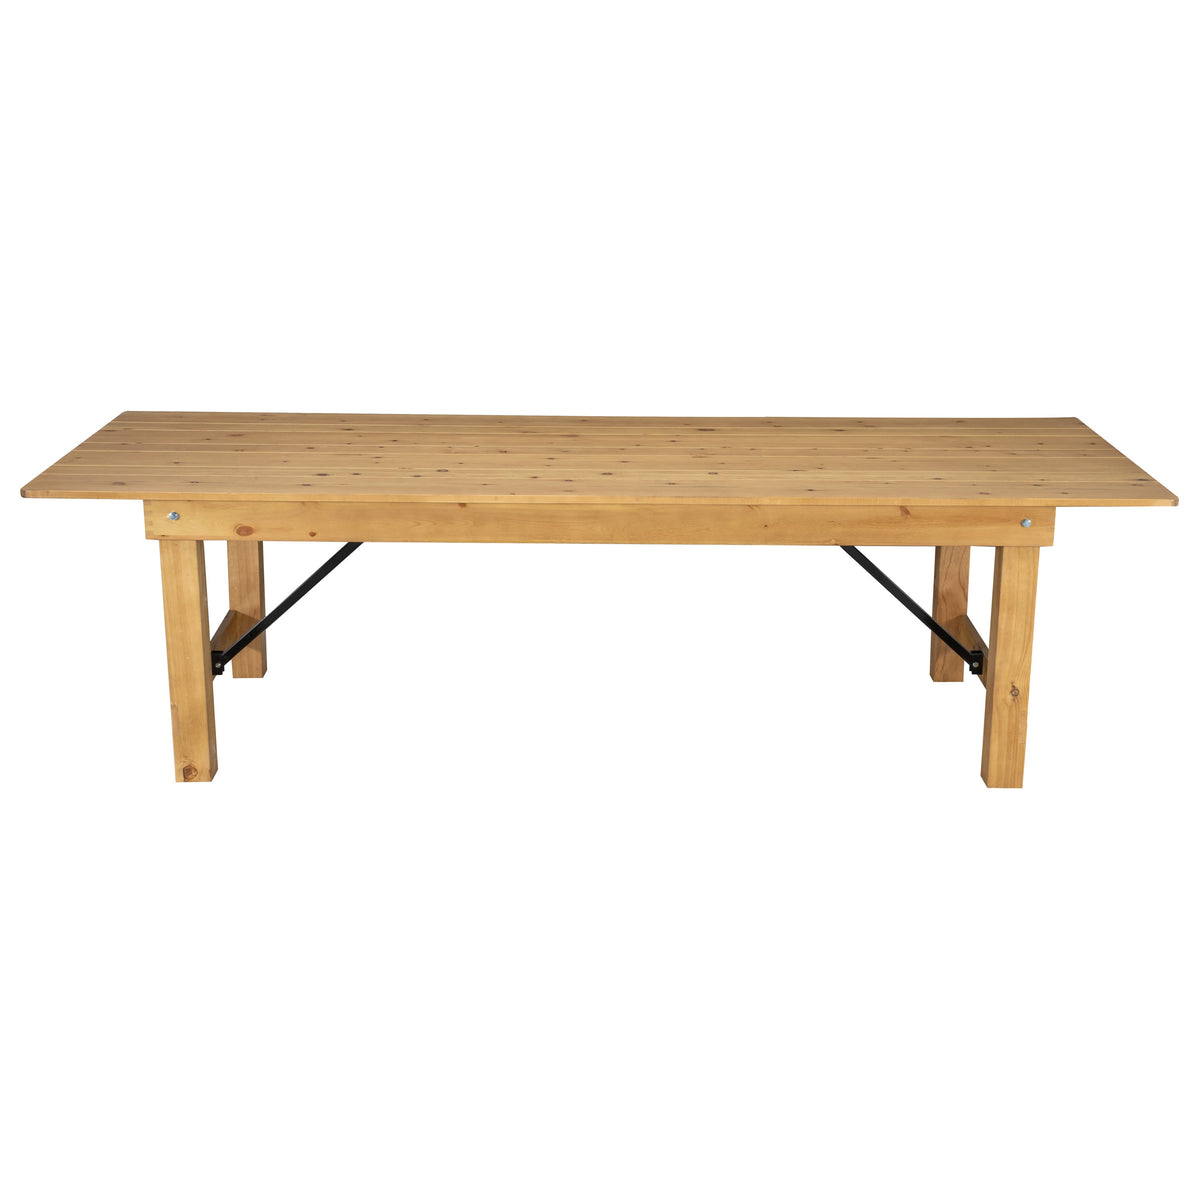 Light Natural |#| 9' x 40inch Rectangular Antique Rustic Light Natural Solid Pine Folding Farm Table